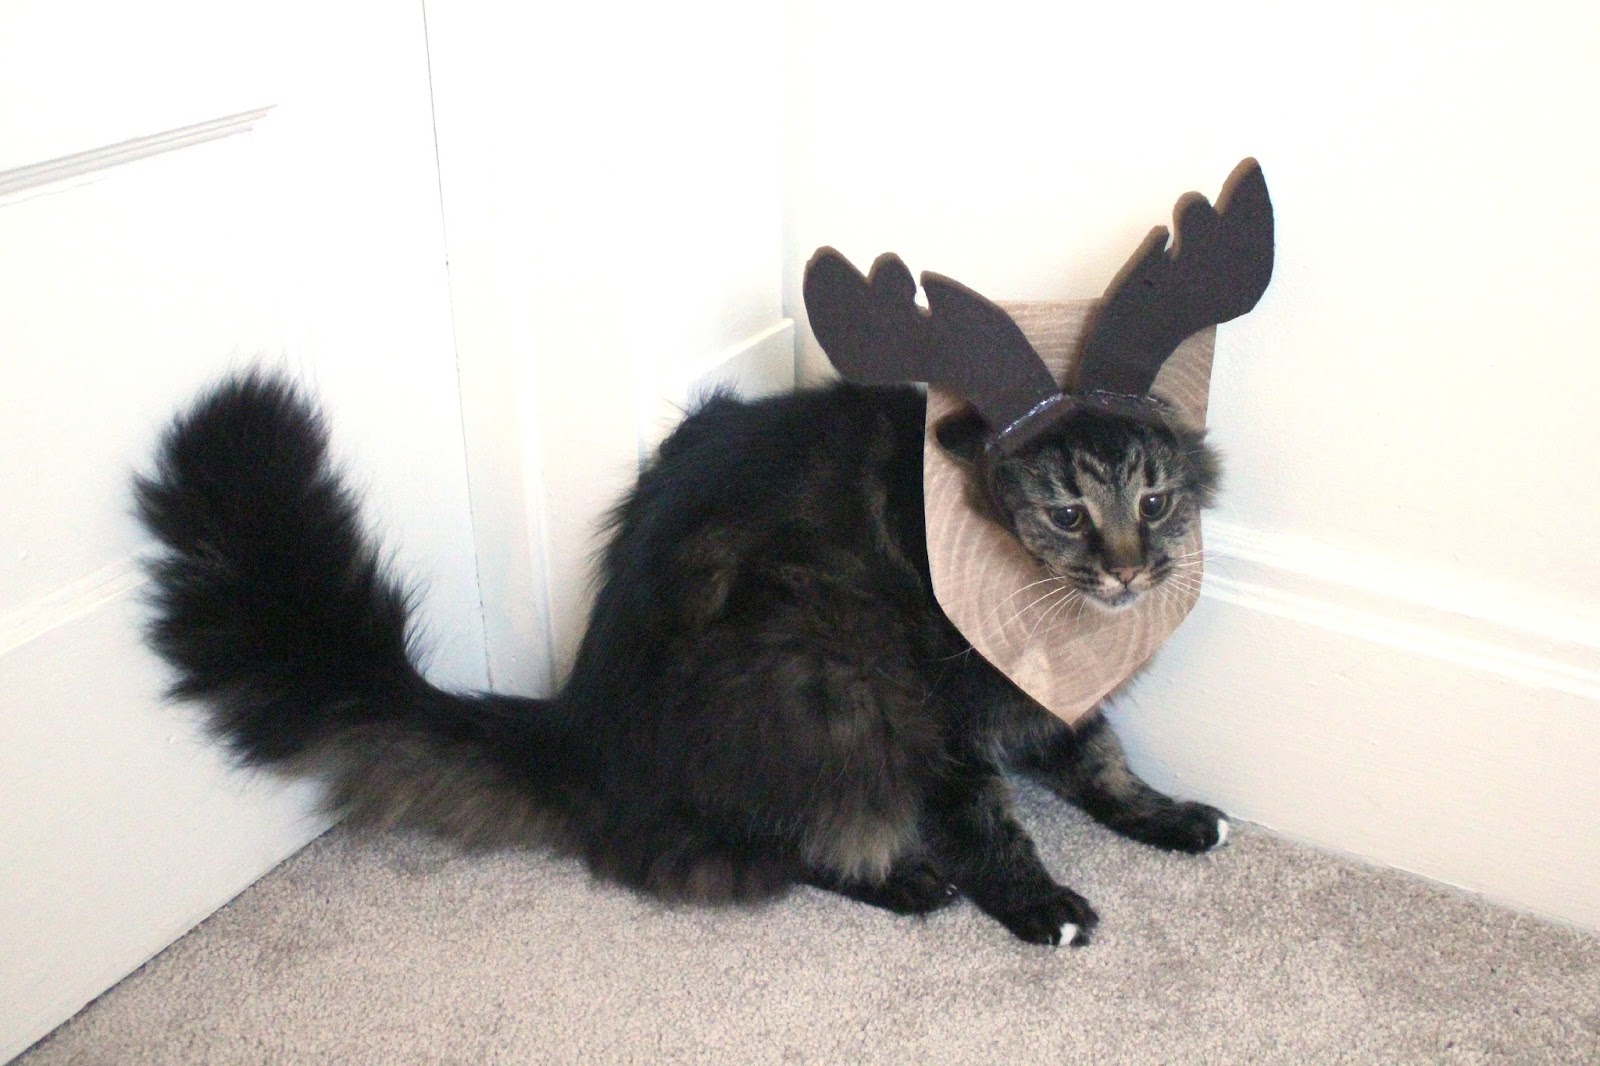 https://blogs.perl.org/users/byterock/The%20Incredible%20Mounted%20Cat%20Moose%20Costume%2019.jpg